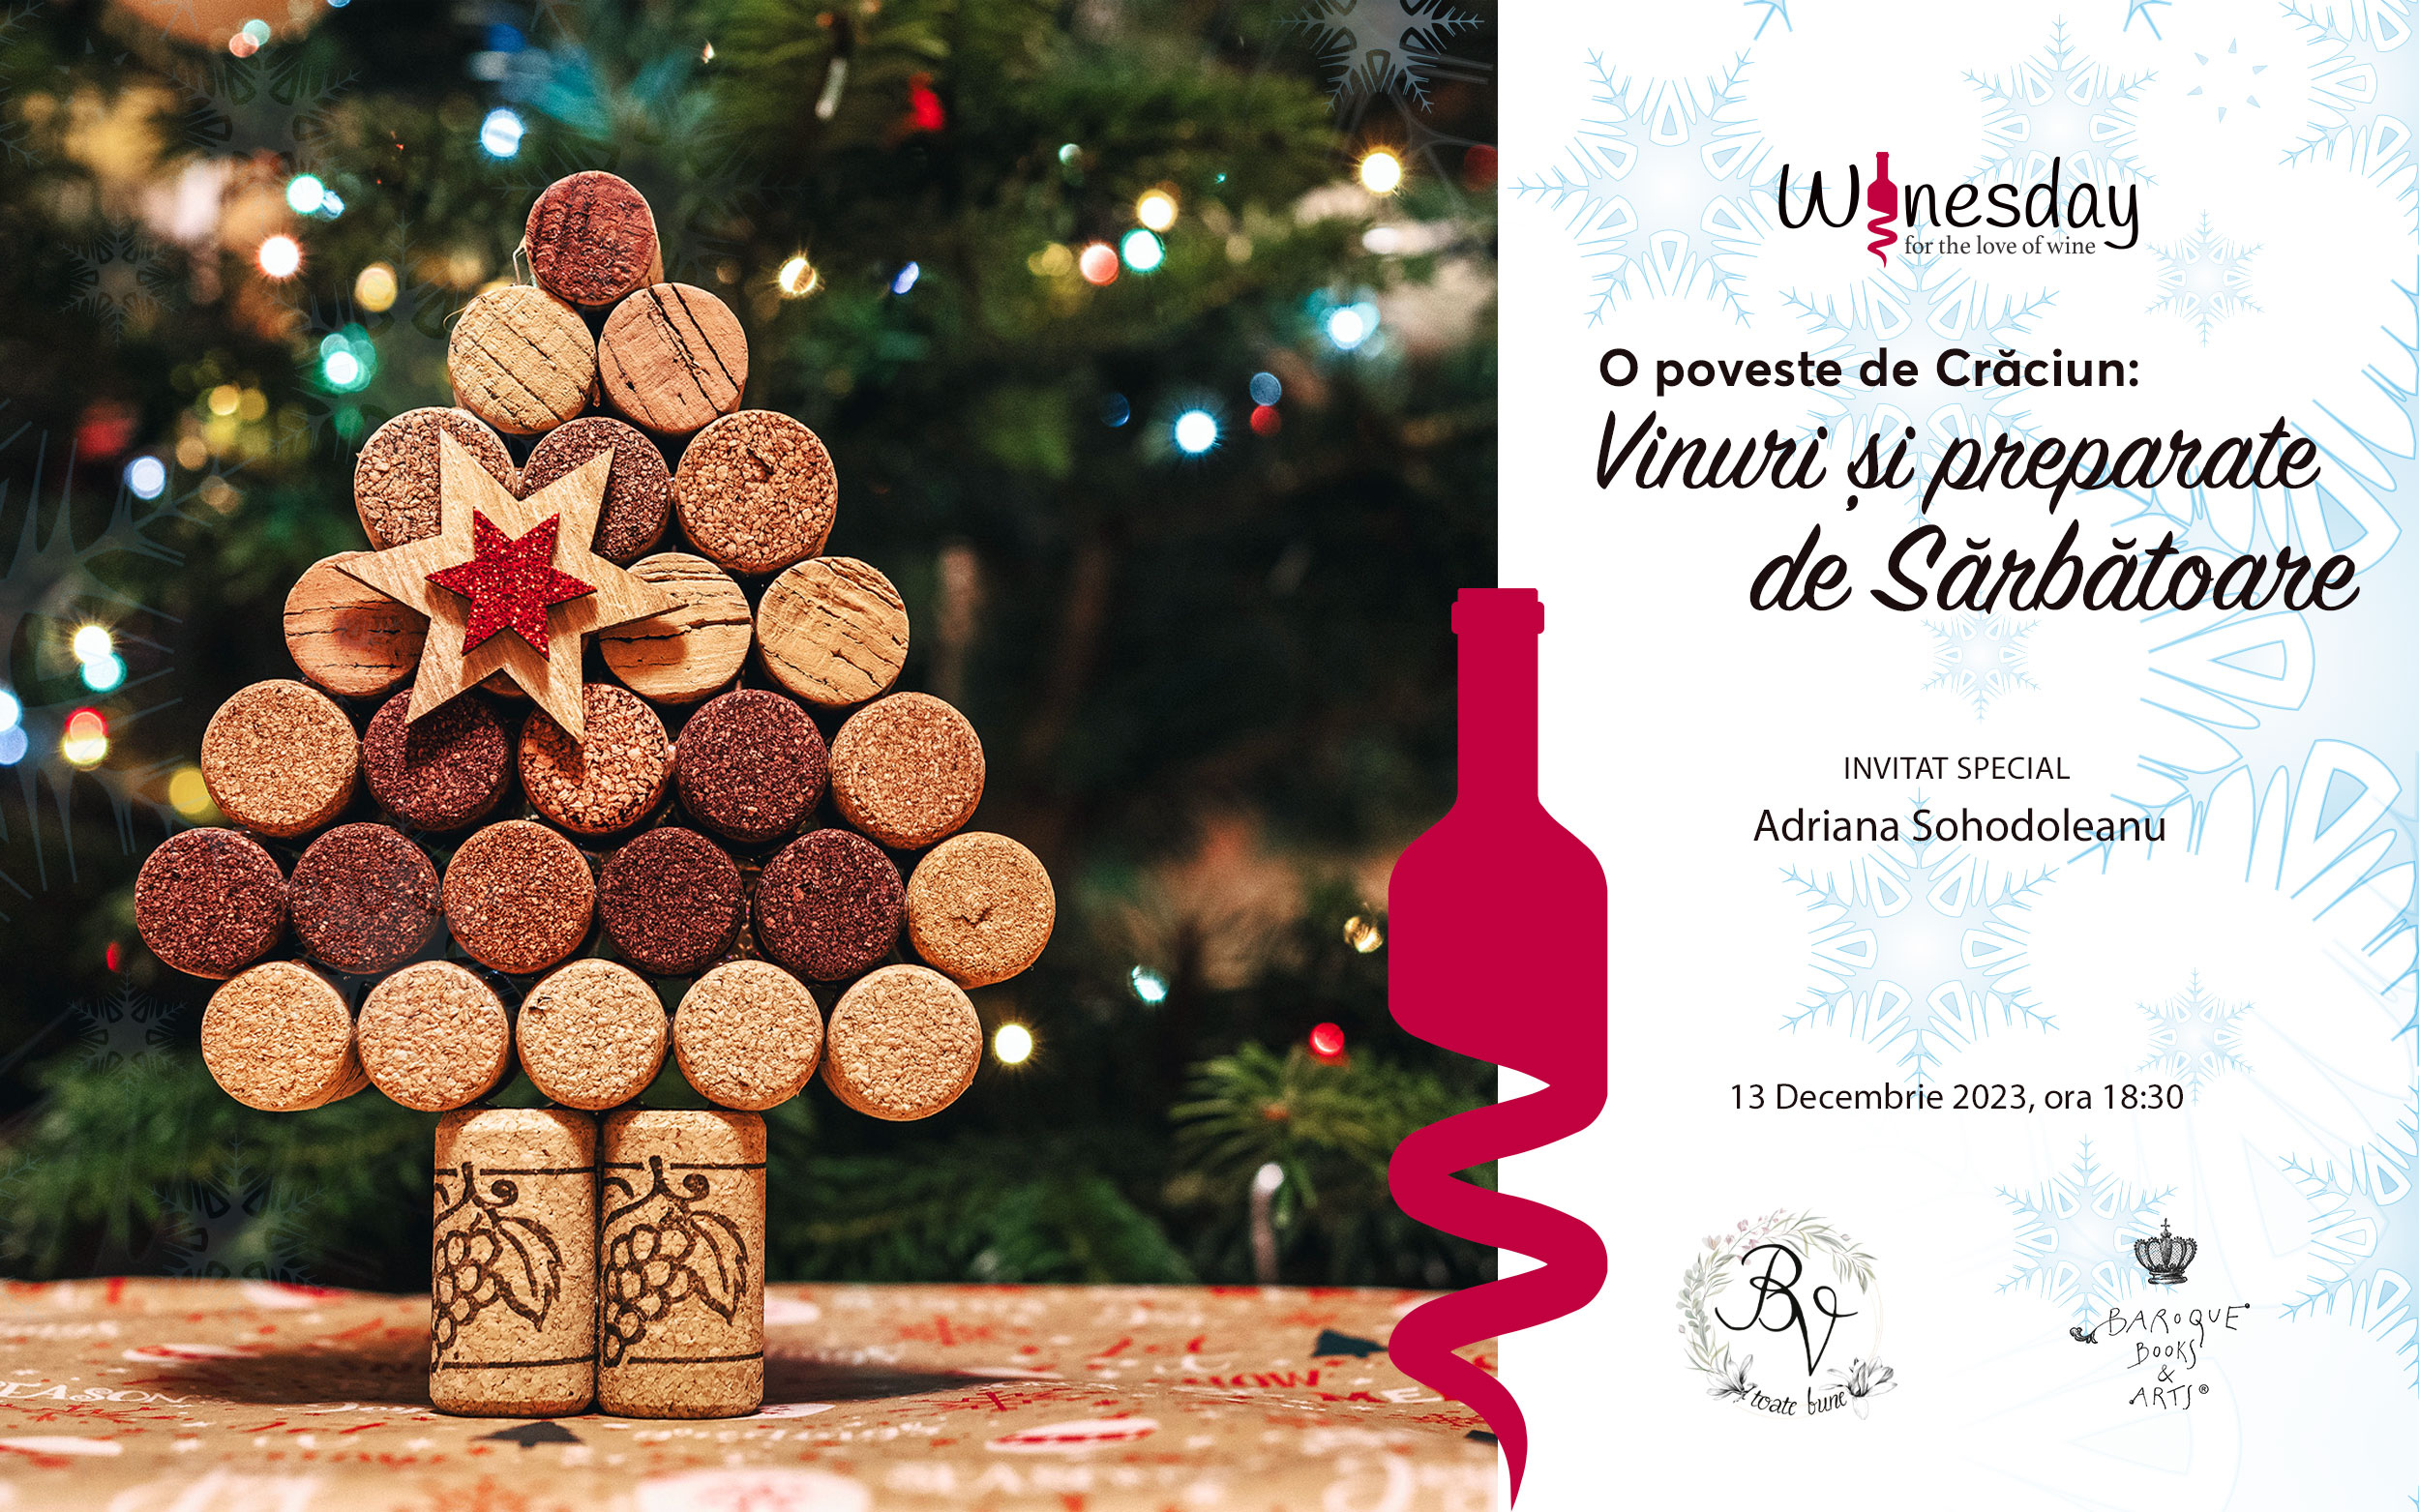 A Christmas story: festive wines and dishes (Bucharest)